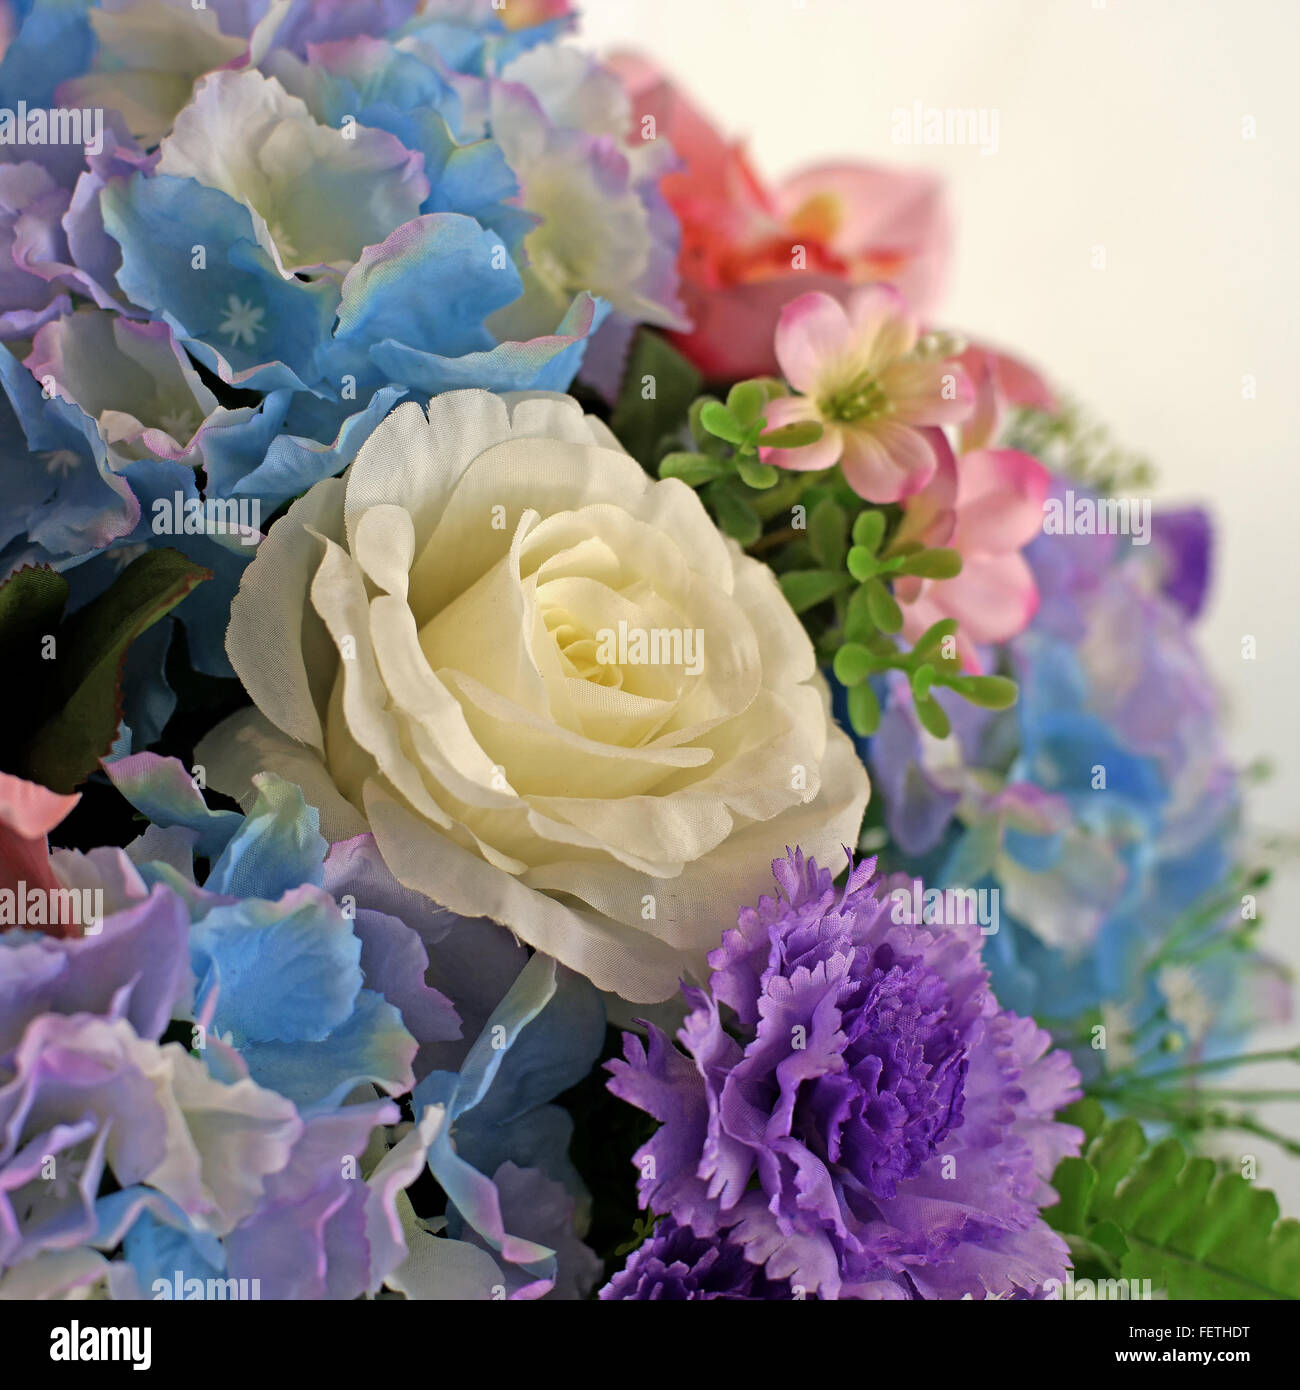 closeup of colorful rose artificial flower Stock Photo